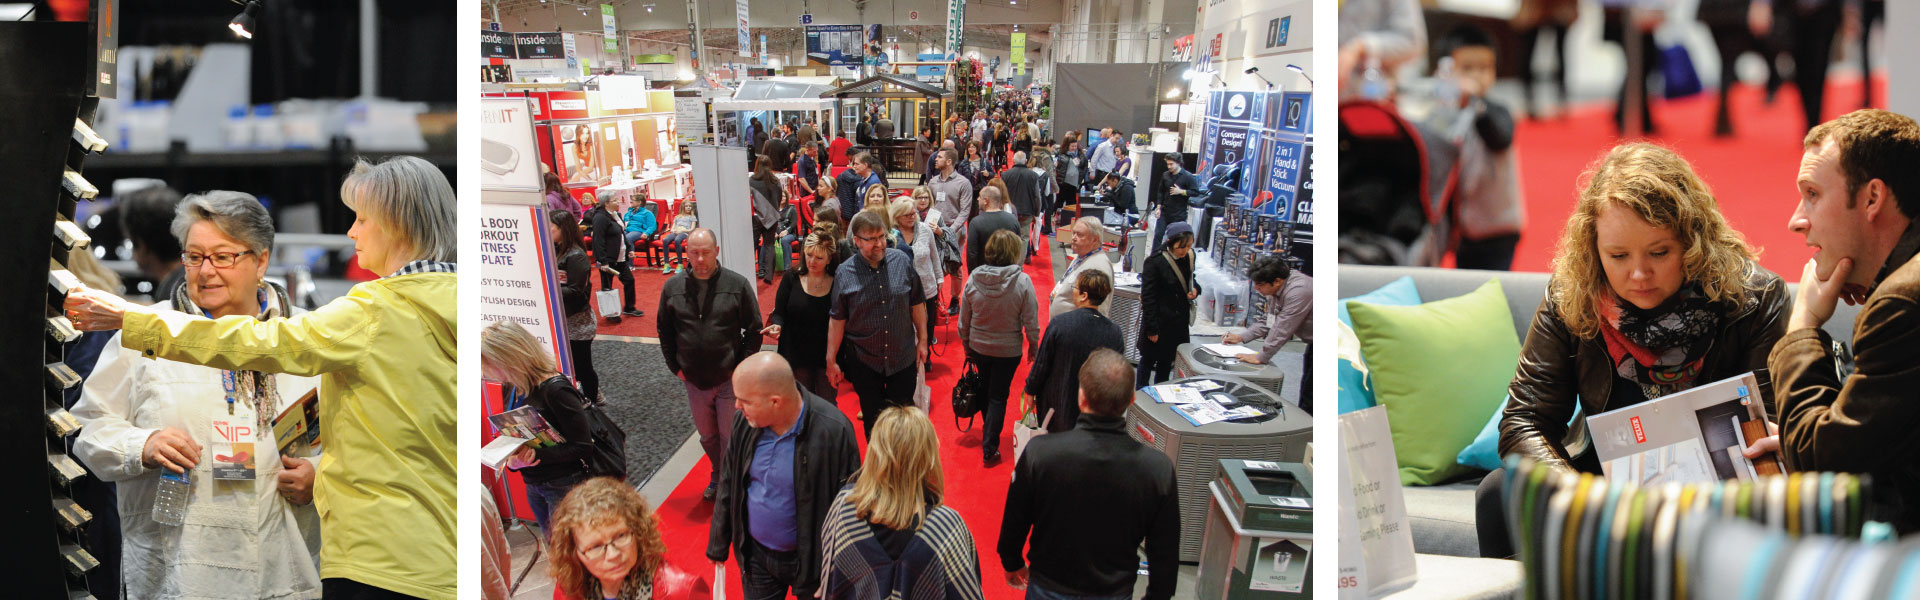 Why Exhibit At A Home Show? Toronto Home Shows